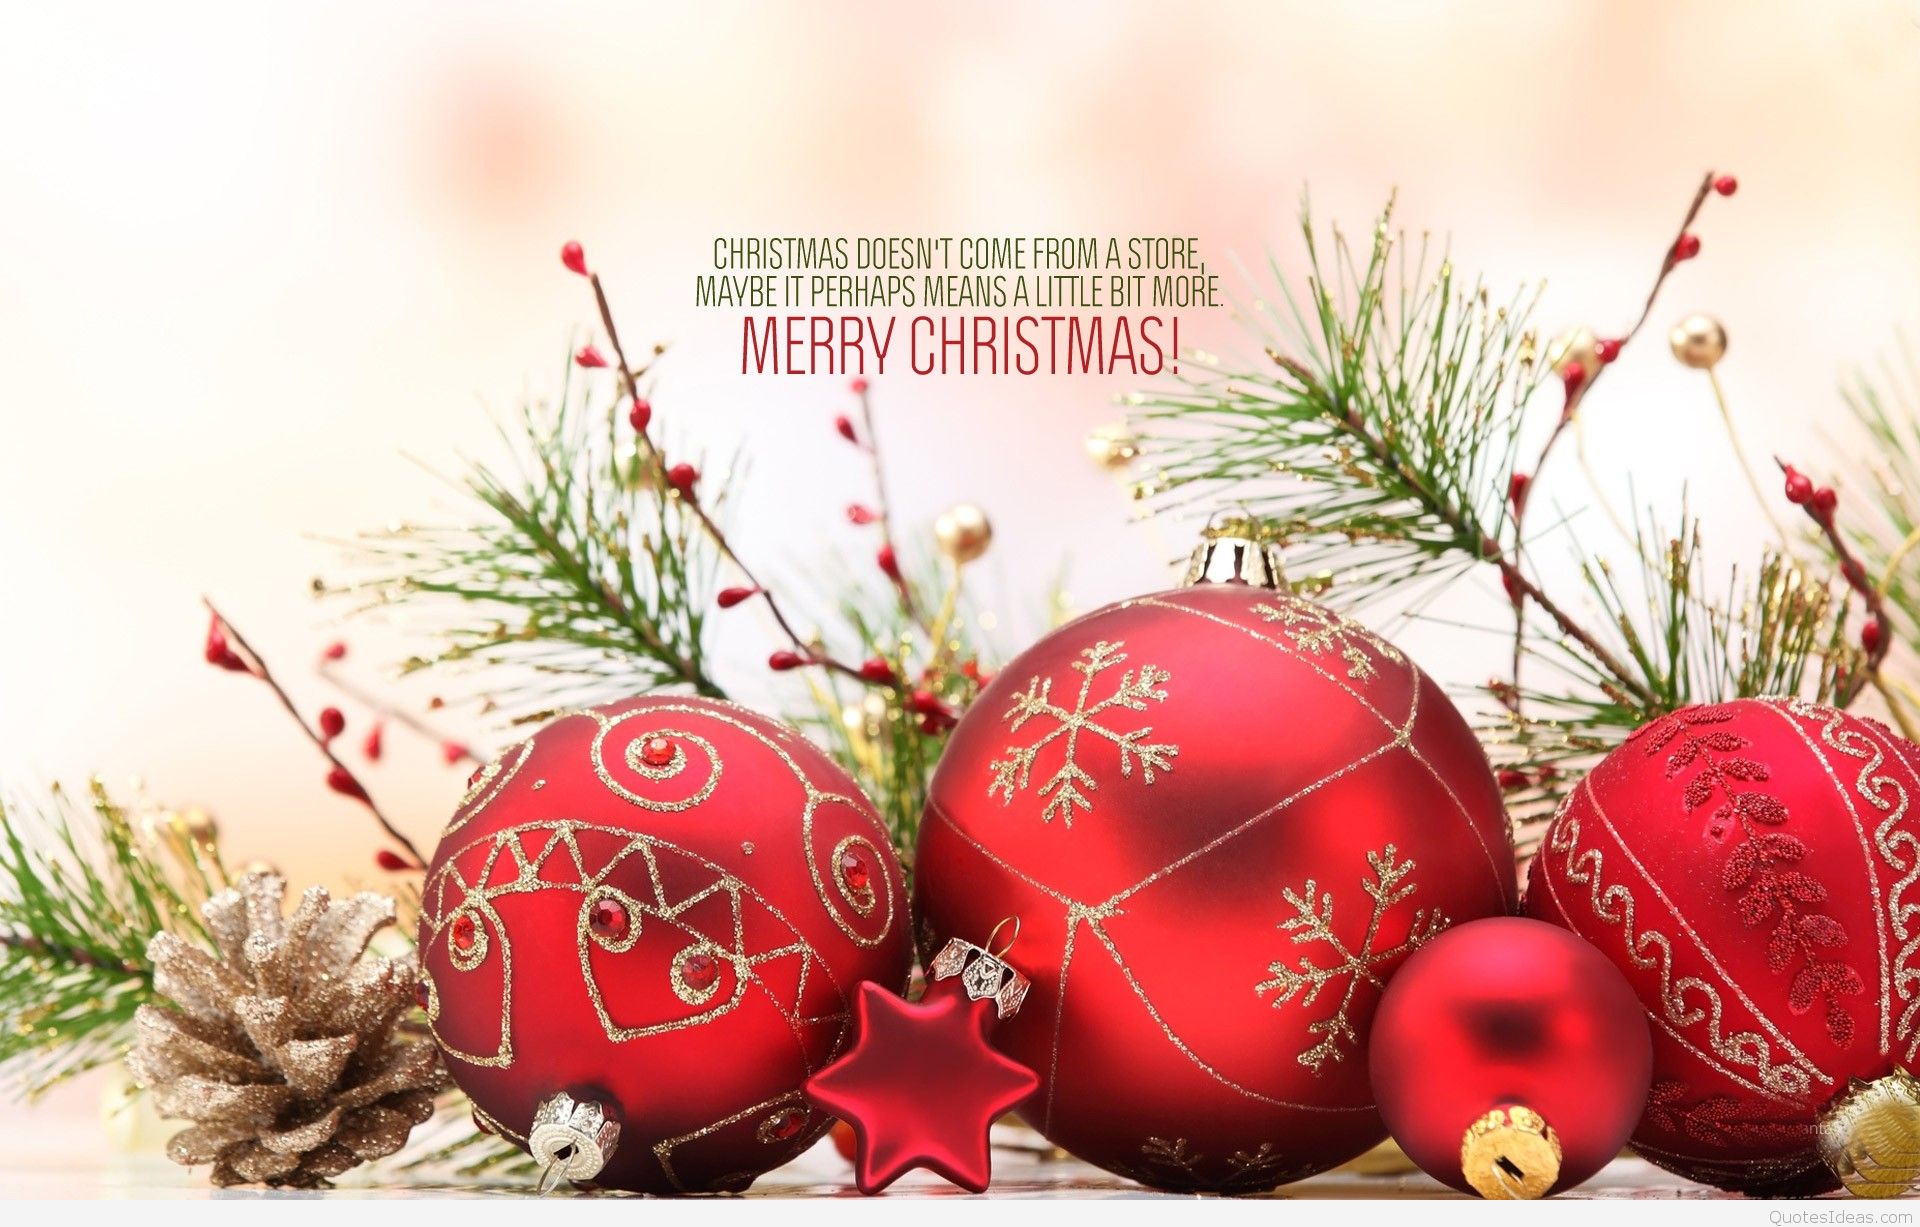 Family Merry Christmas Motivations Quote Wallpaper - Merry Christmas Messages 2018 - HD Wallpaper 